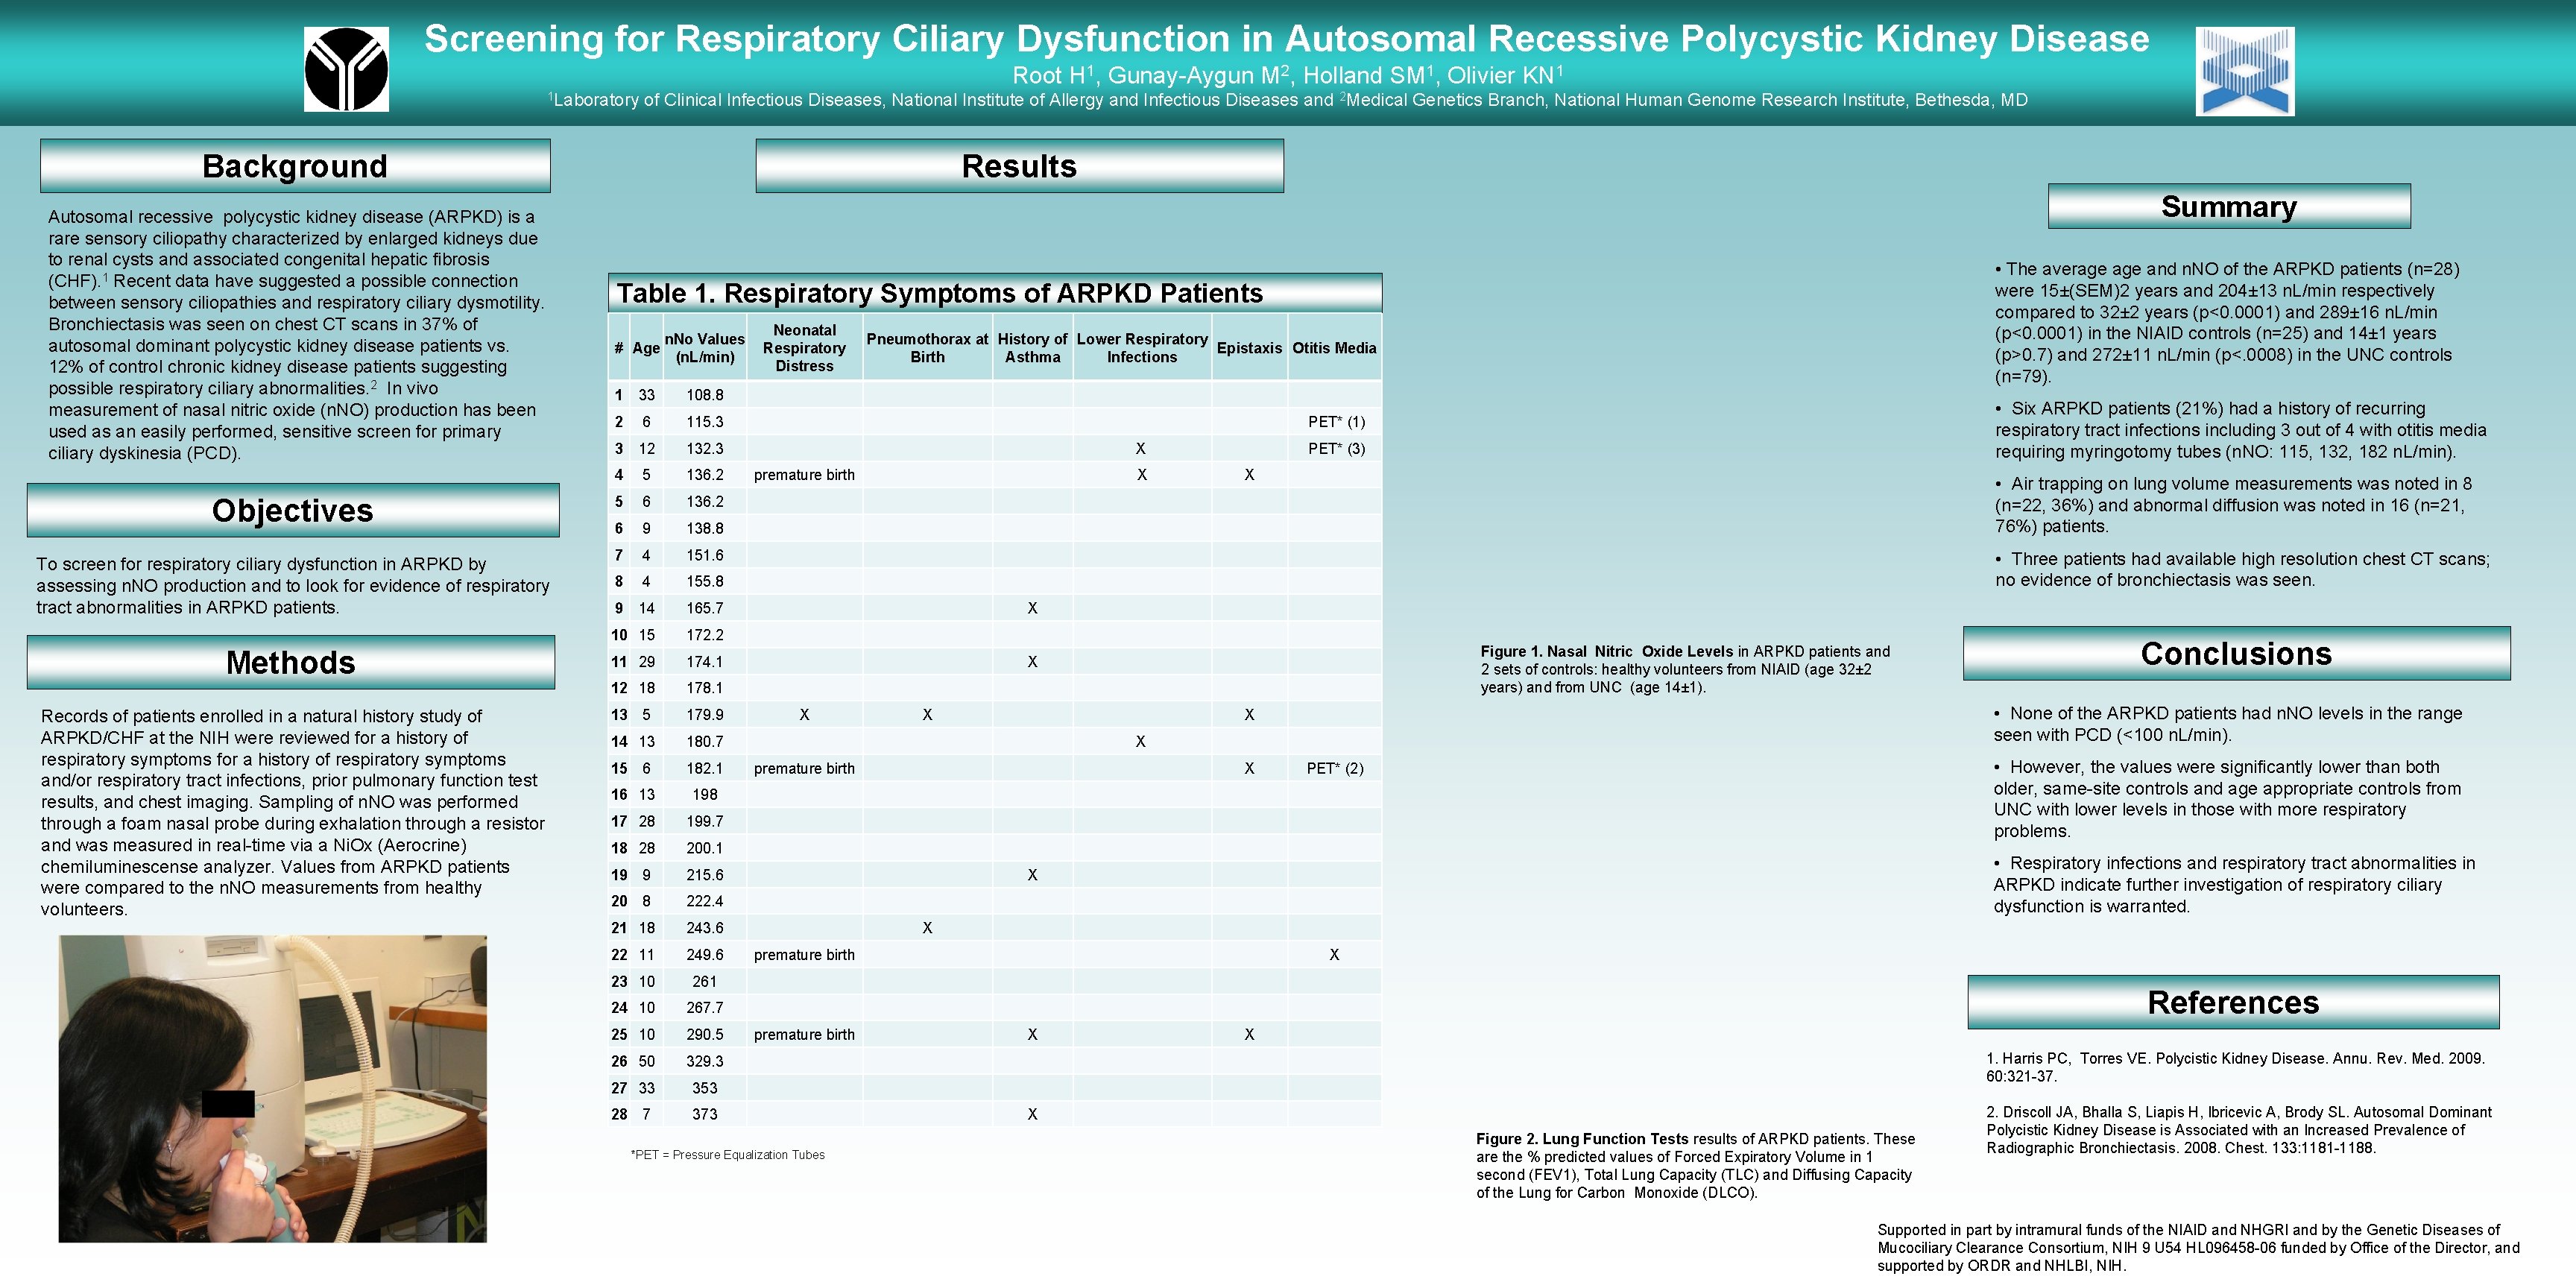 Screening for Respiratory Ciliary Dysfunction in Autosomal Recessive Polycystic Kidney Disease Root H 1,